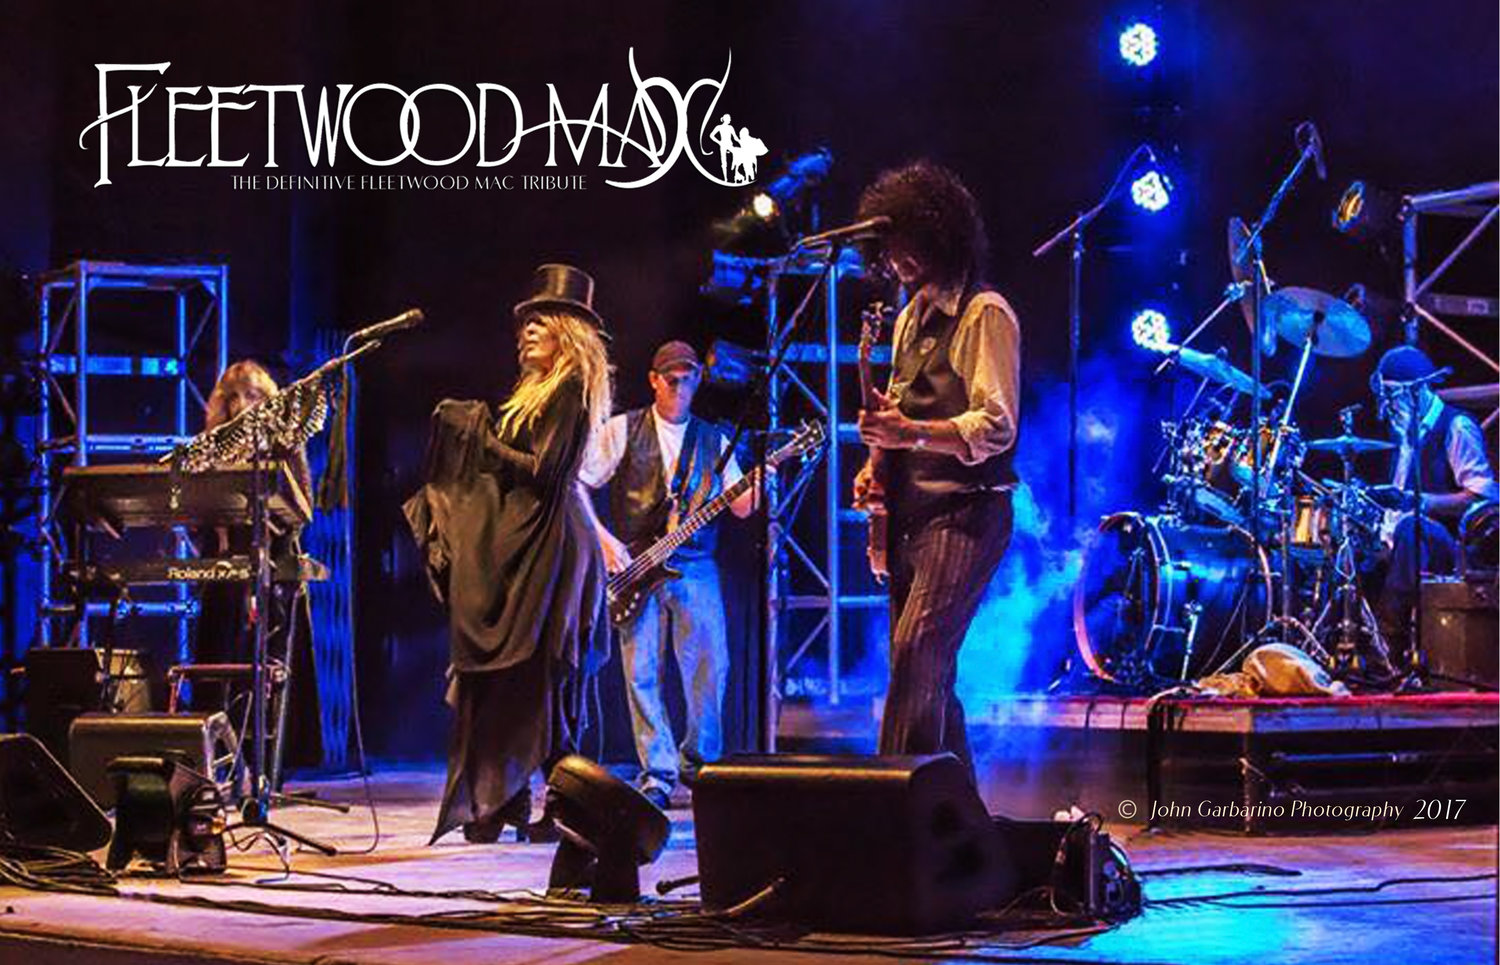 Fleetwood Max - The Definitive Fleetwood Mac Tribute will take the stage at 10:30 a.m. to kick off the day.